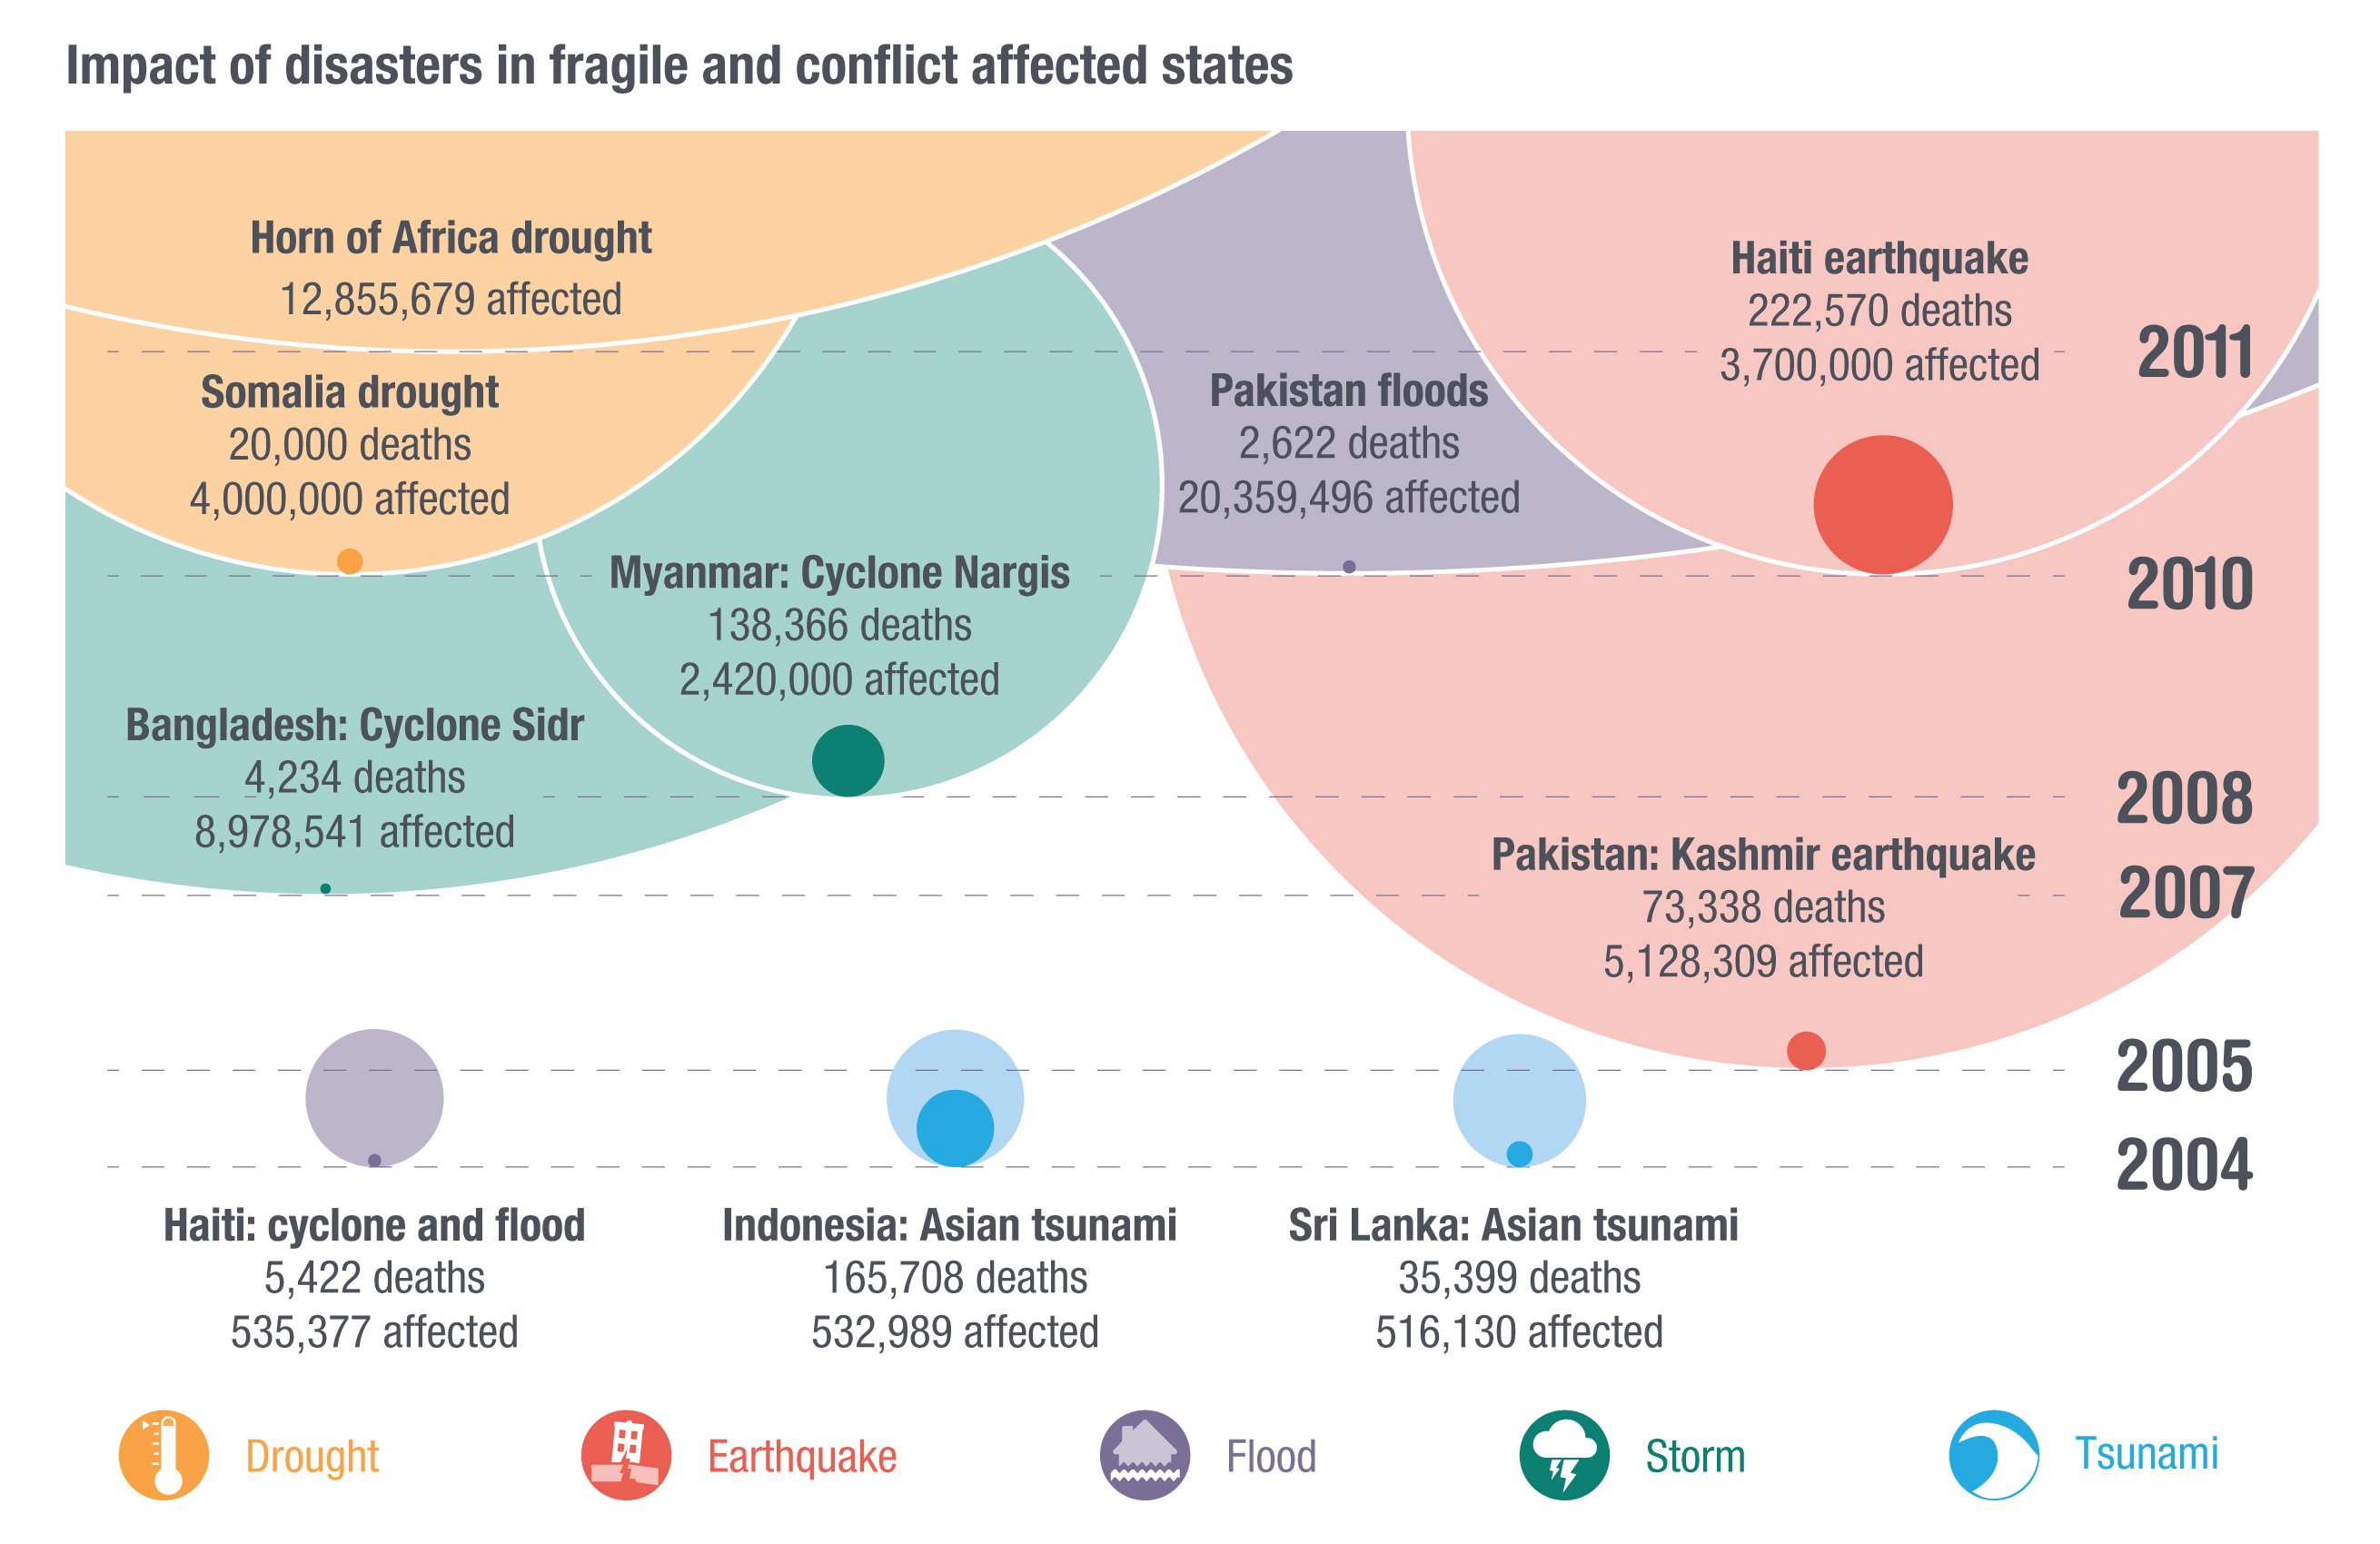 Impact of disasters in fragile and conflict-affected states